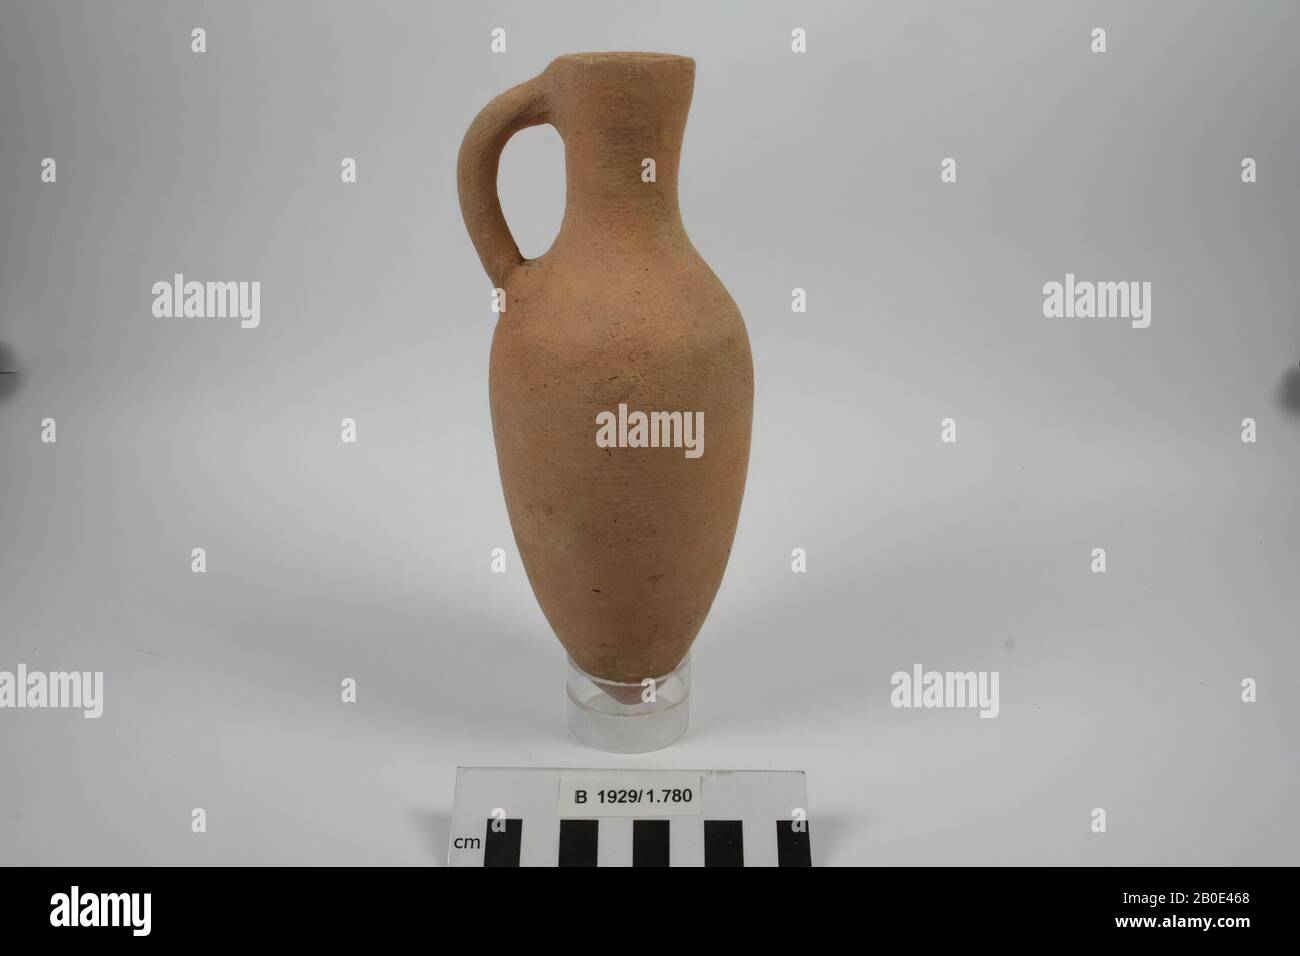 https://c8.alamy.com/comp/2B0E468/an-earthenware-jug-with-point-bottom-an-elongated-body-and-a-slightly-flared-neck-and-rim-the-object-has-one-ear-tableware-pottery-h-206-cm-d-belly-78-cm-d-edge-35-cm-middle-bronze-age-ii-1800-1550-bc-israel-2B0E468.jpg